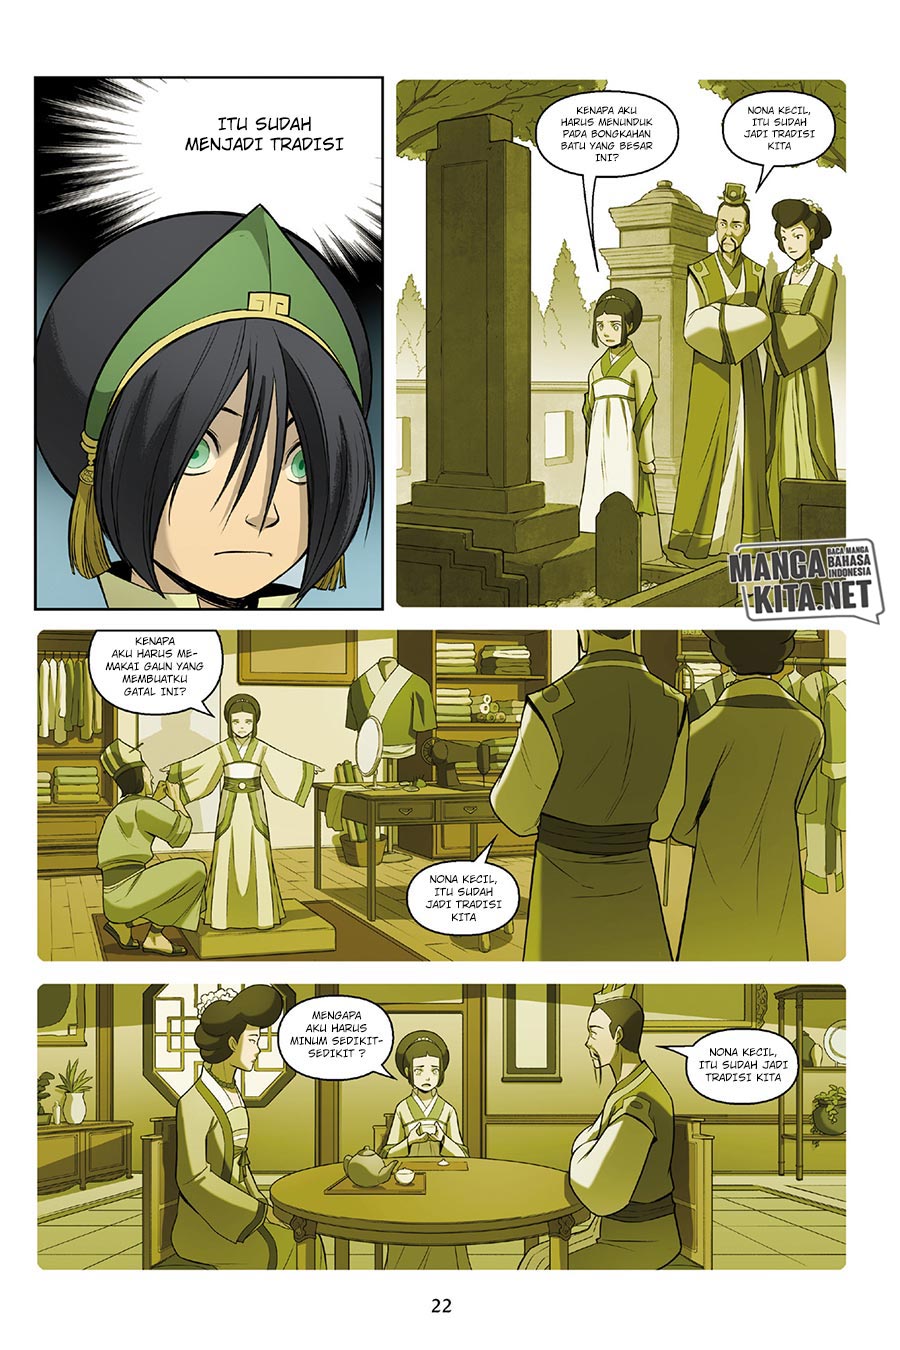 Avatar The Last Airbender – The Rift Chapter 1.1